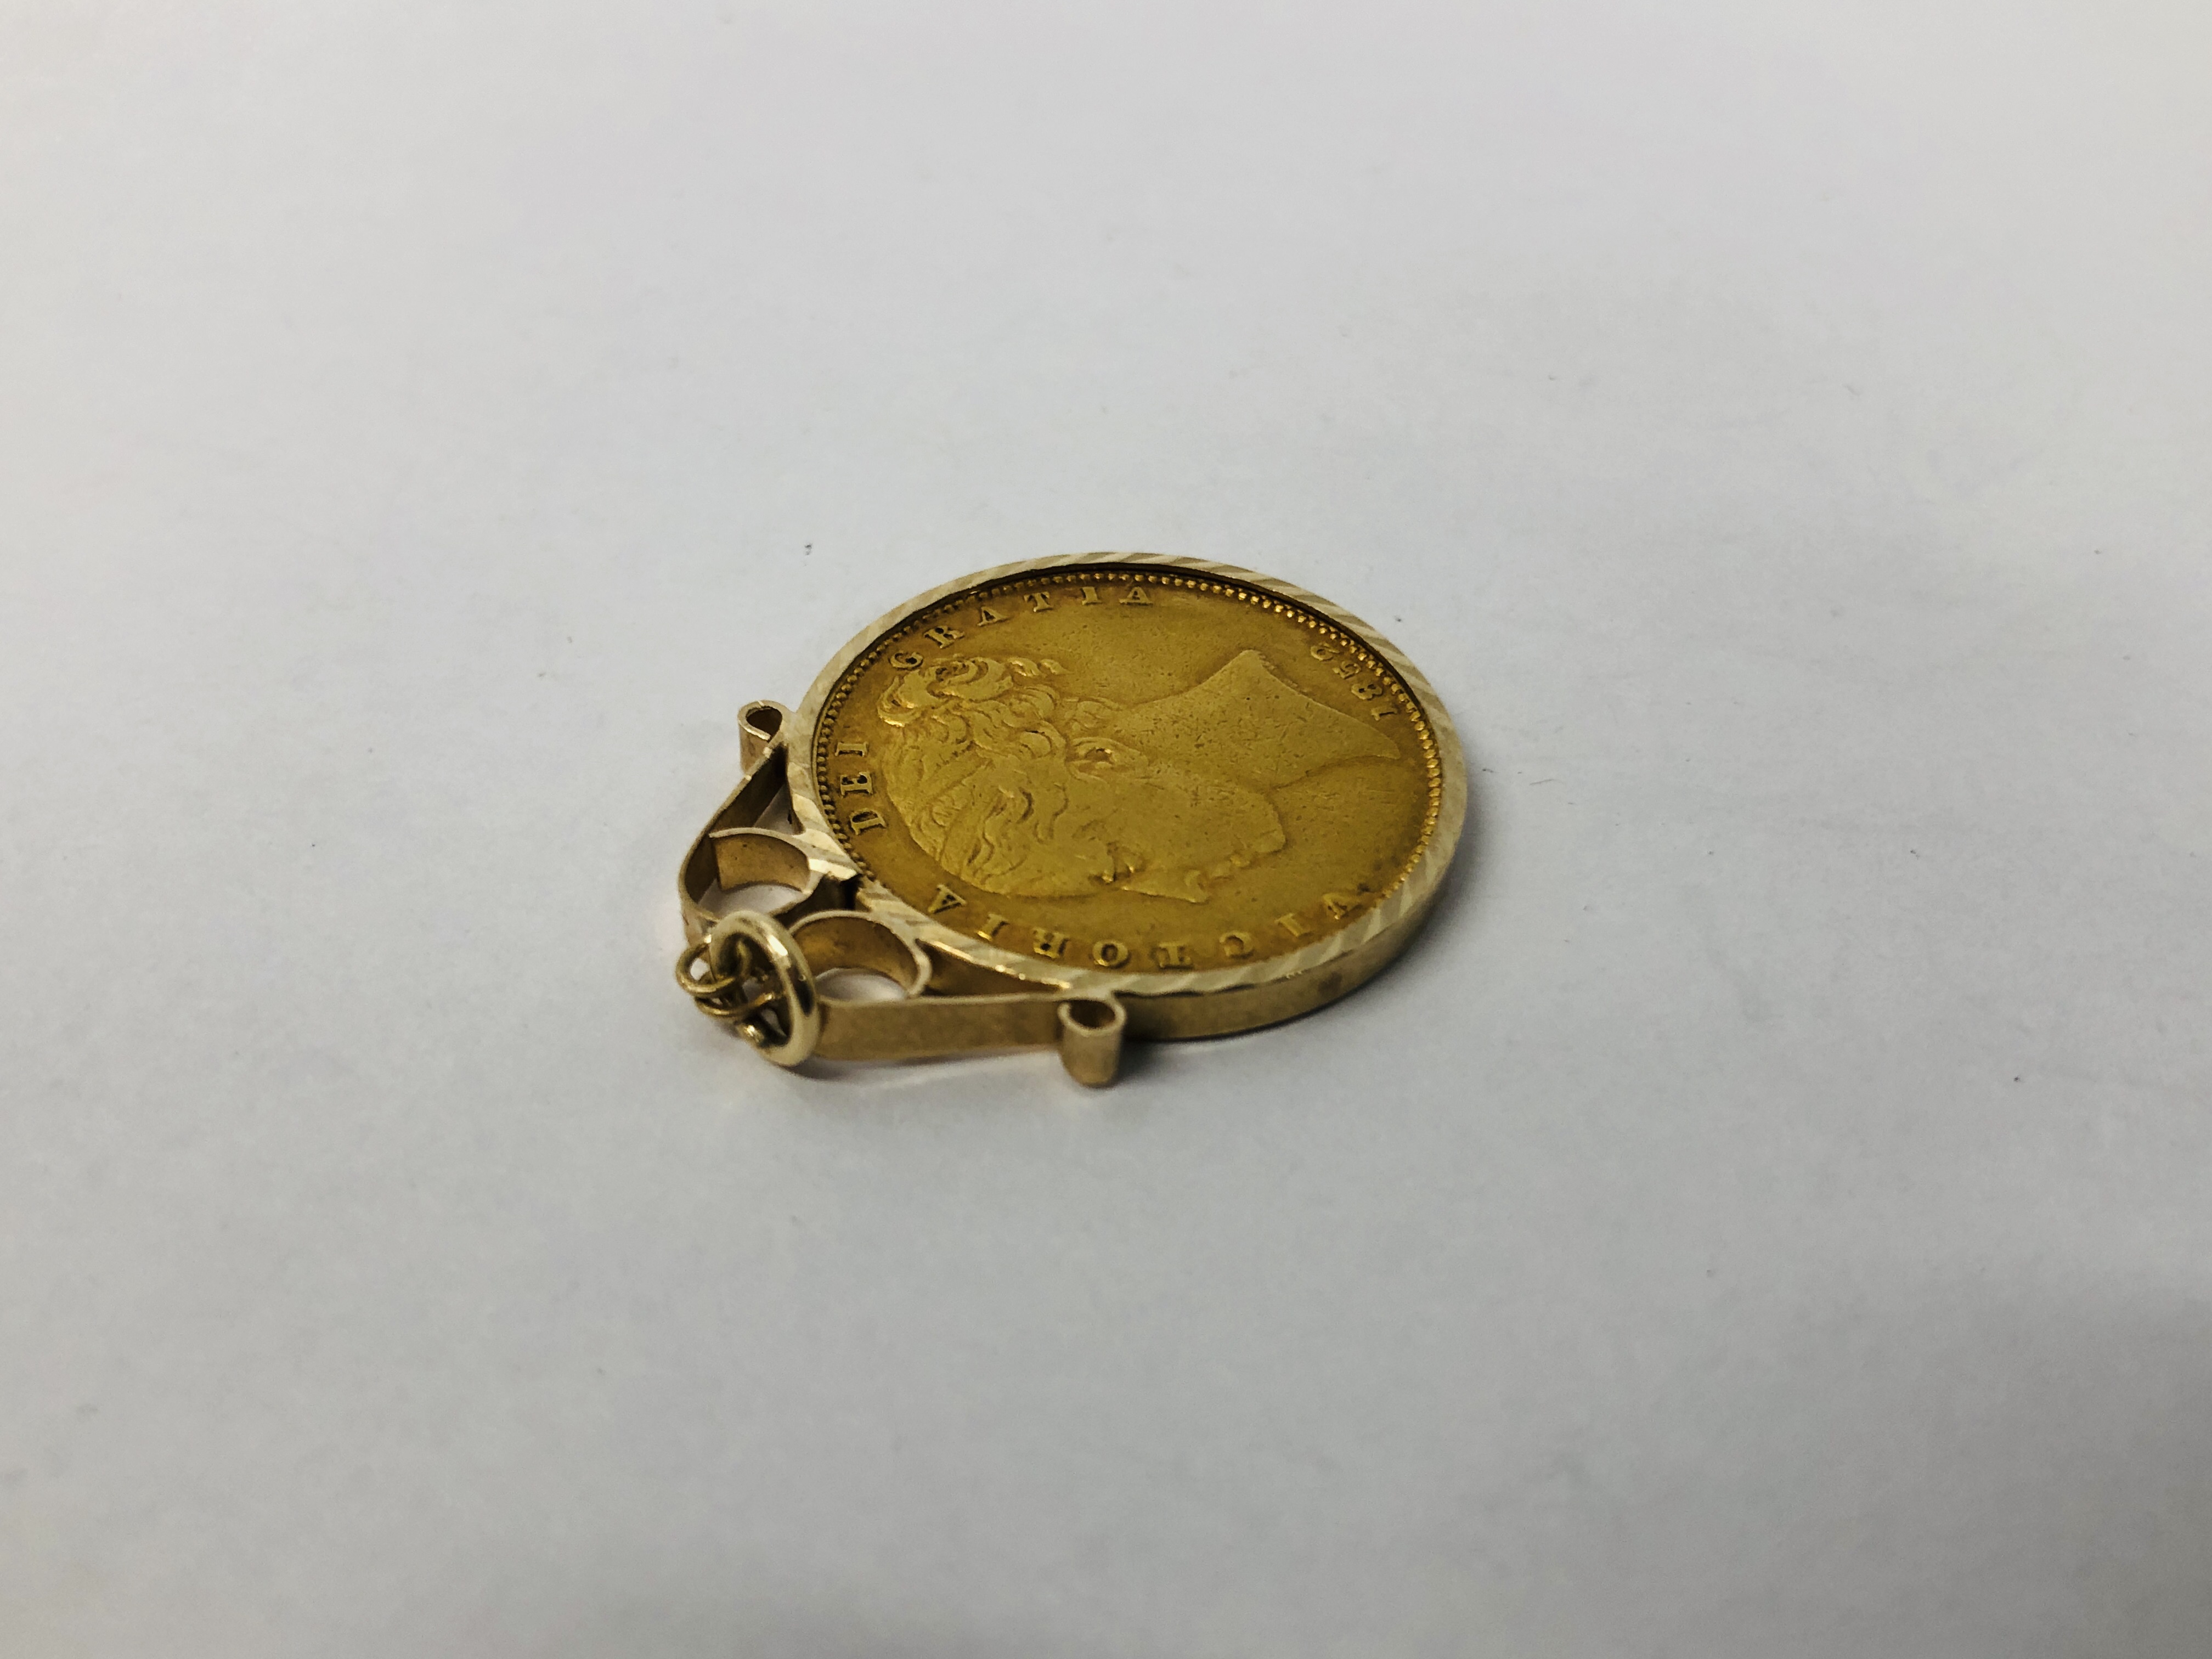 1852 GOLD SOVEREIGN - VICTORIA YOUNG HEAD SHIELD BACK LONDON IN 9CT GOLD PENDANT MOUNT. - Image 4 of 7